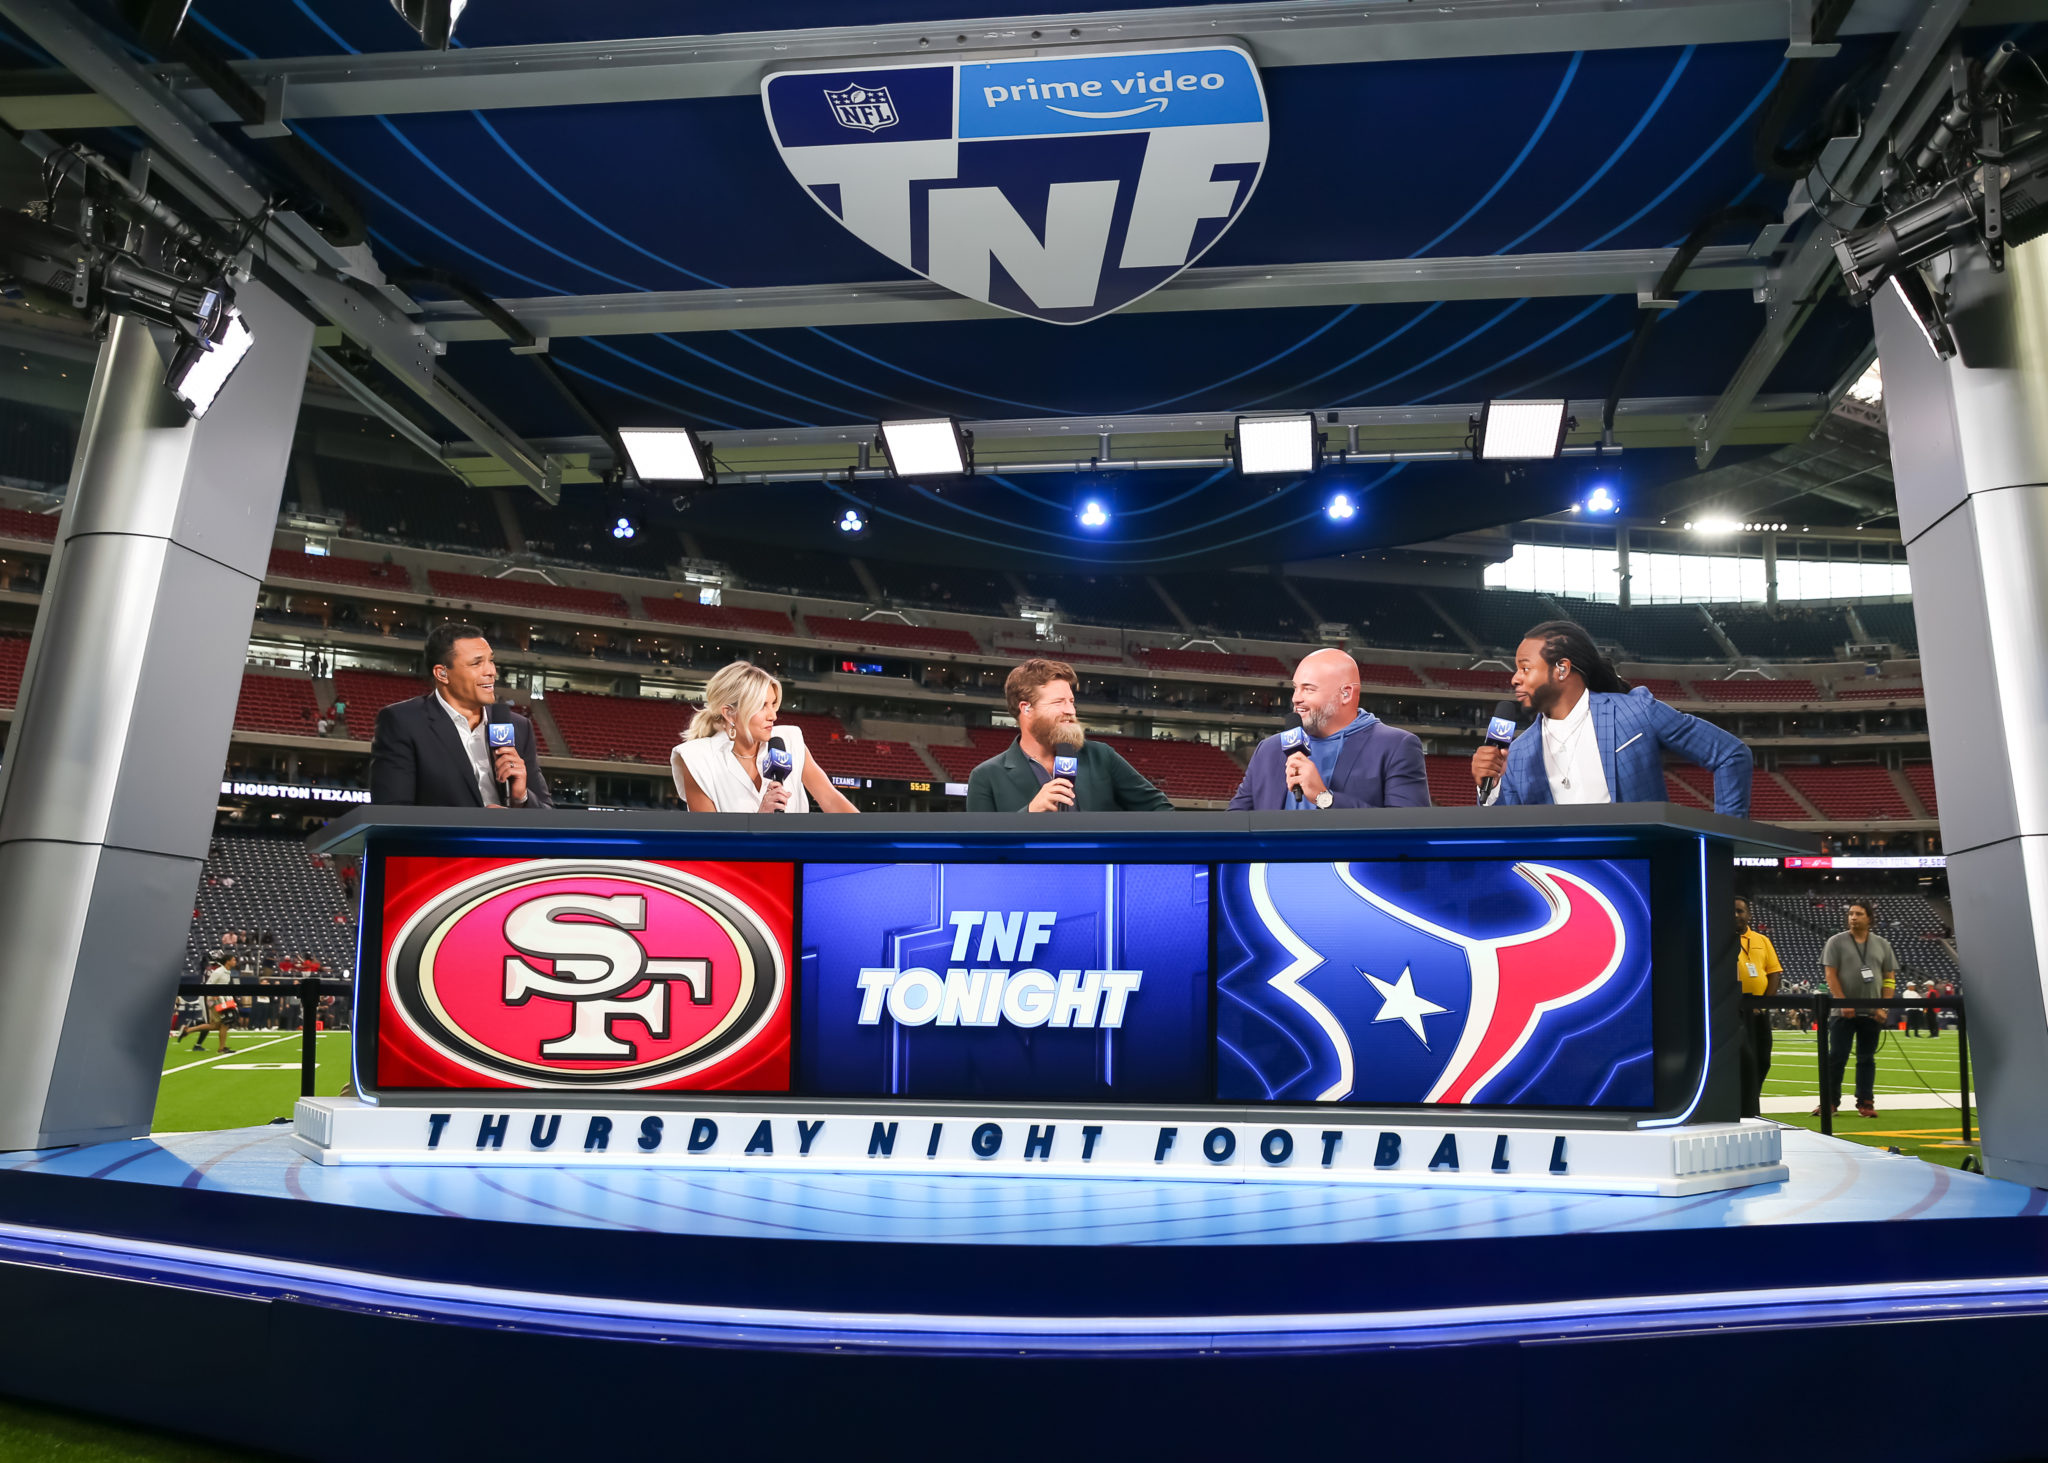 Who are Amazon Prime's Thursday Night Football (TNF) announcers/hosts